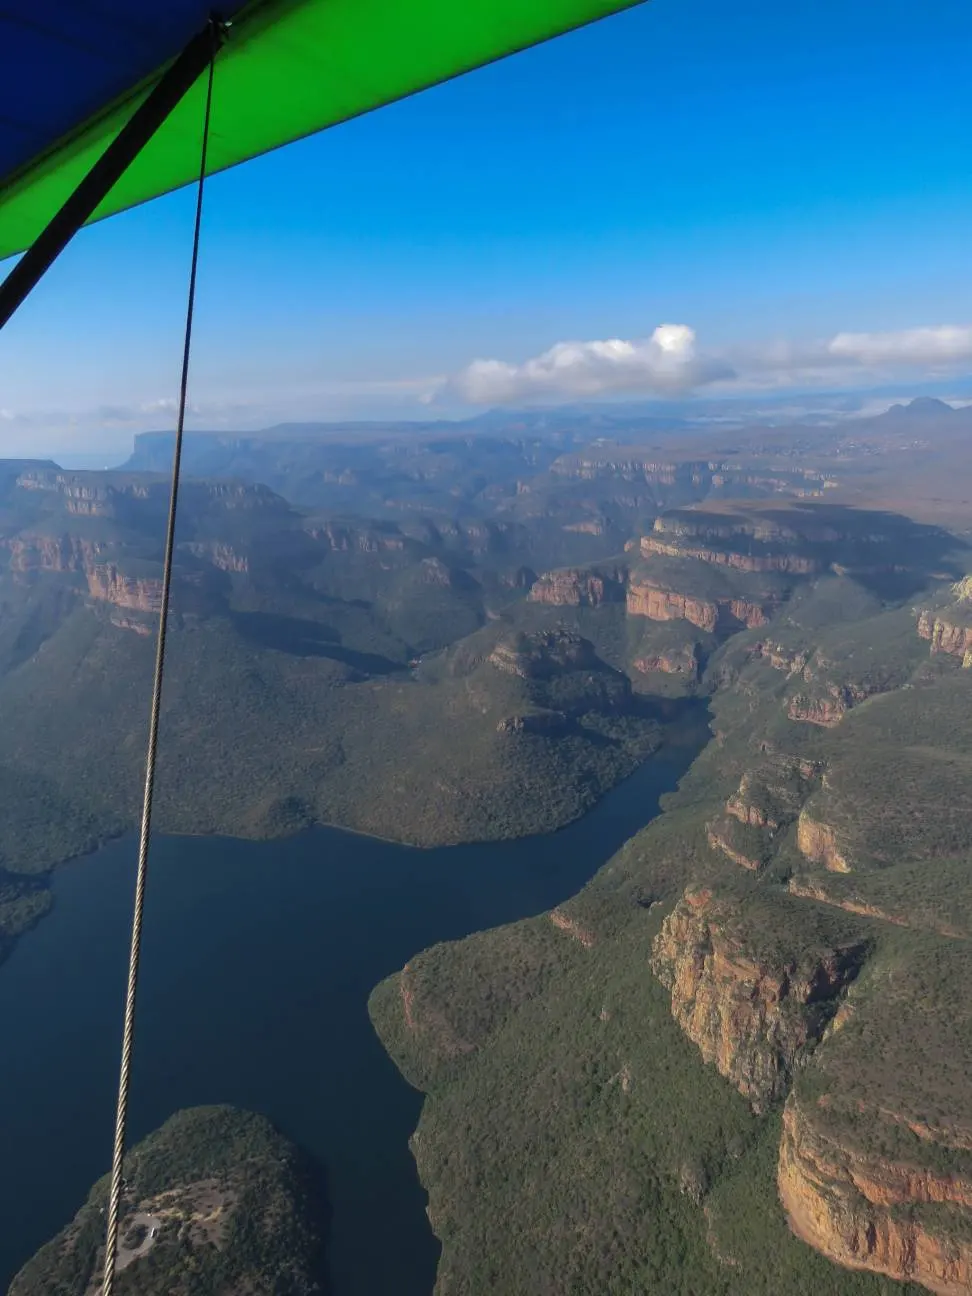 60 Minute Blyde River Canyon Flight